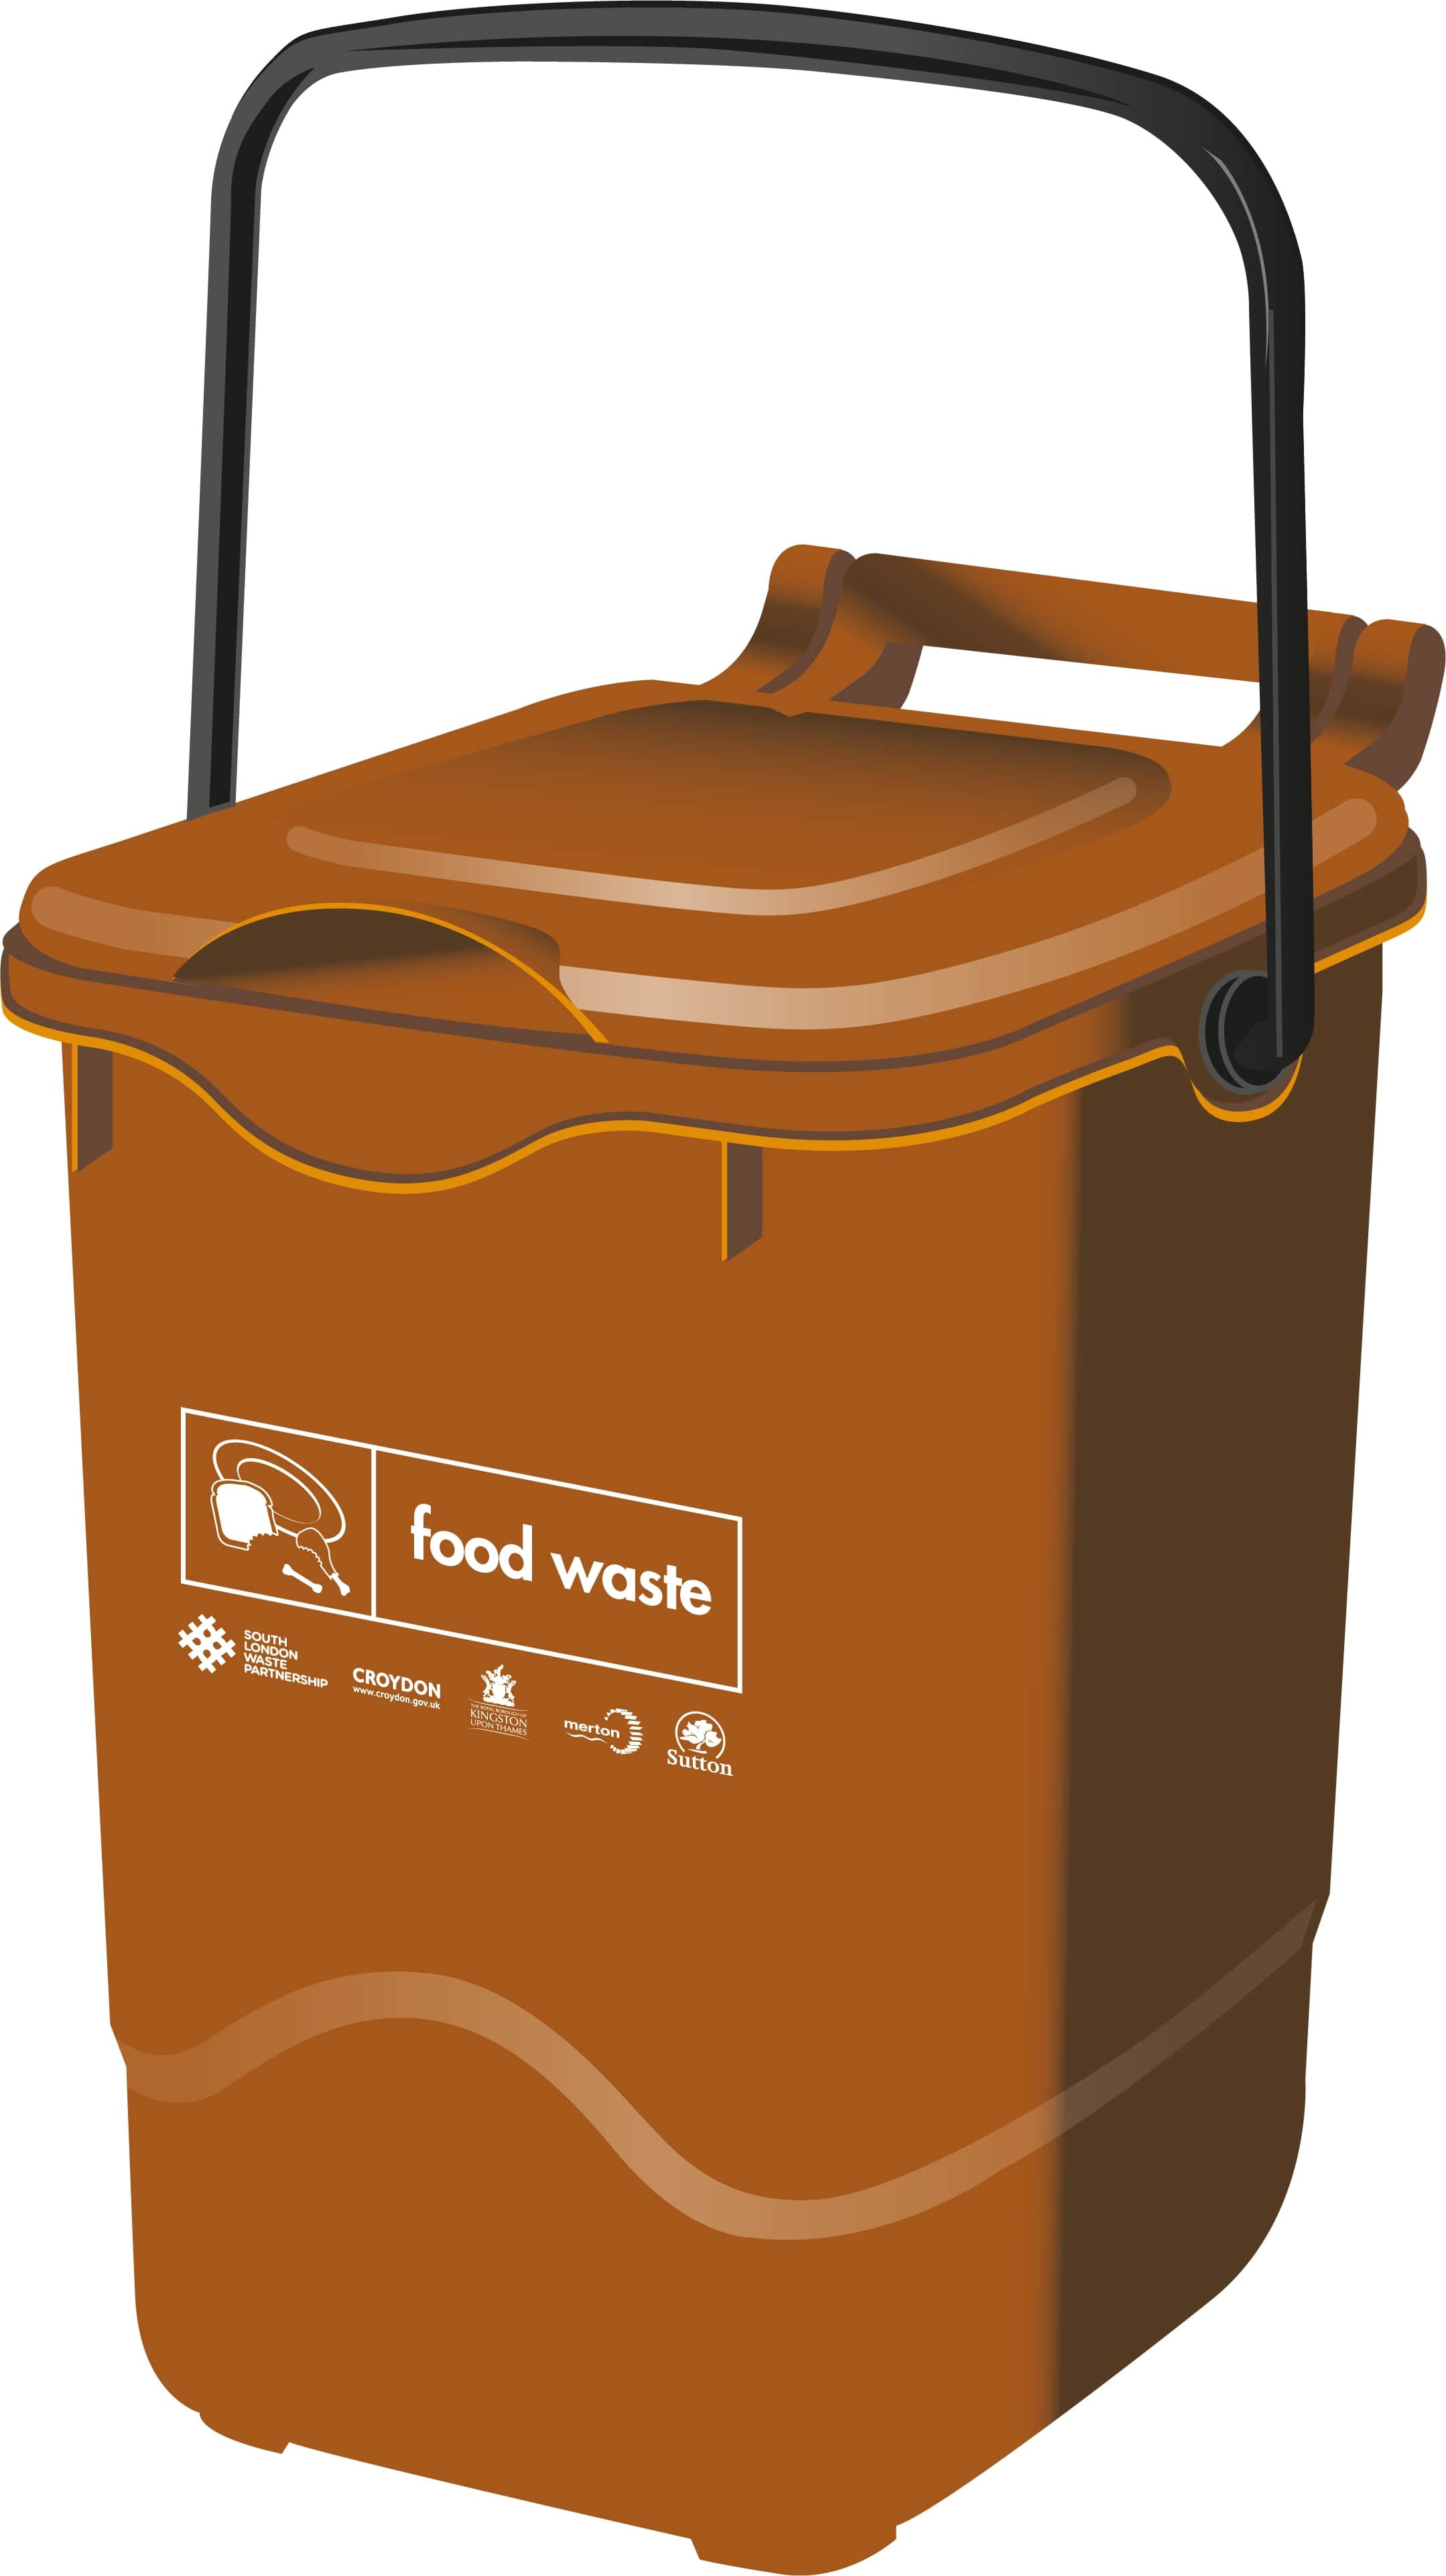 Brown outdoor lockable food waste bin with South London Waste Partnership logos on it.